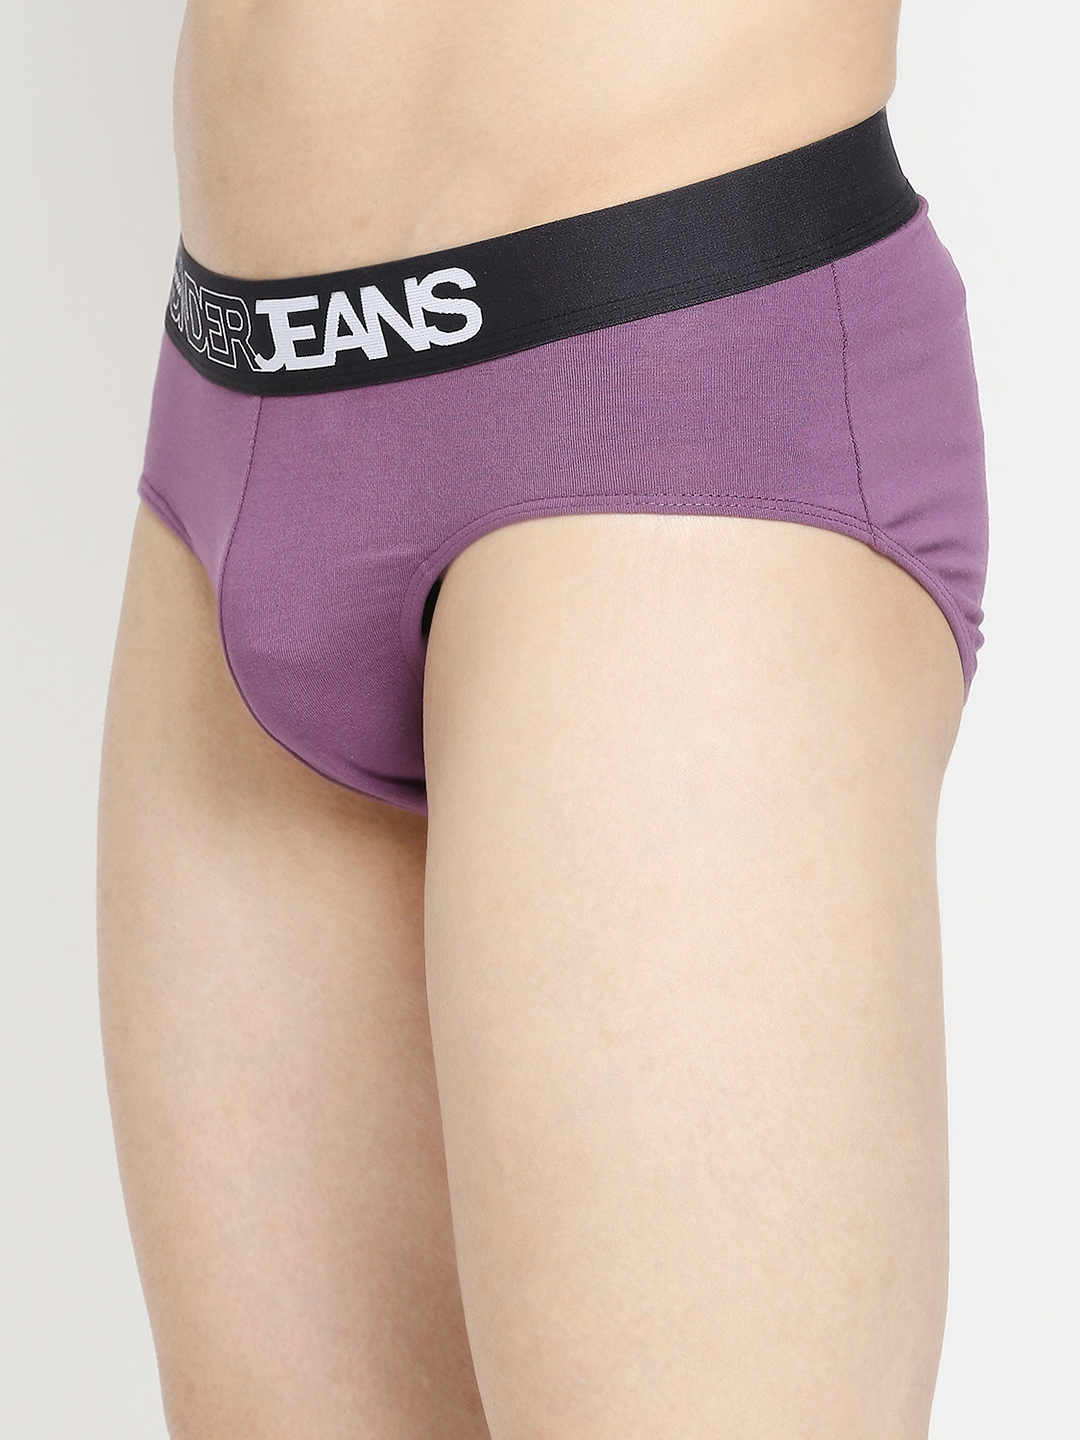 Underjeans by Spykar Dull Purple & Black Cotton Blend Brief - Pack Of 2